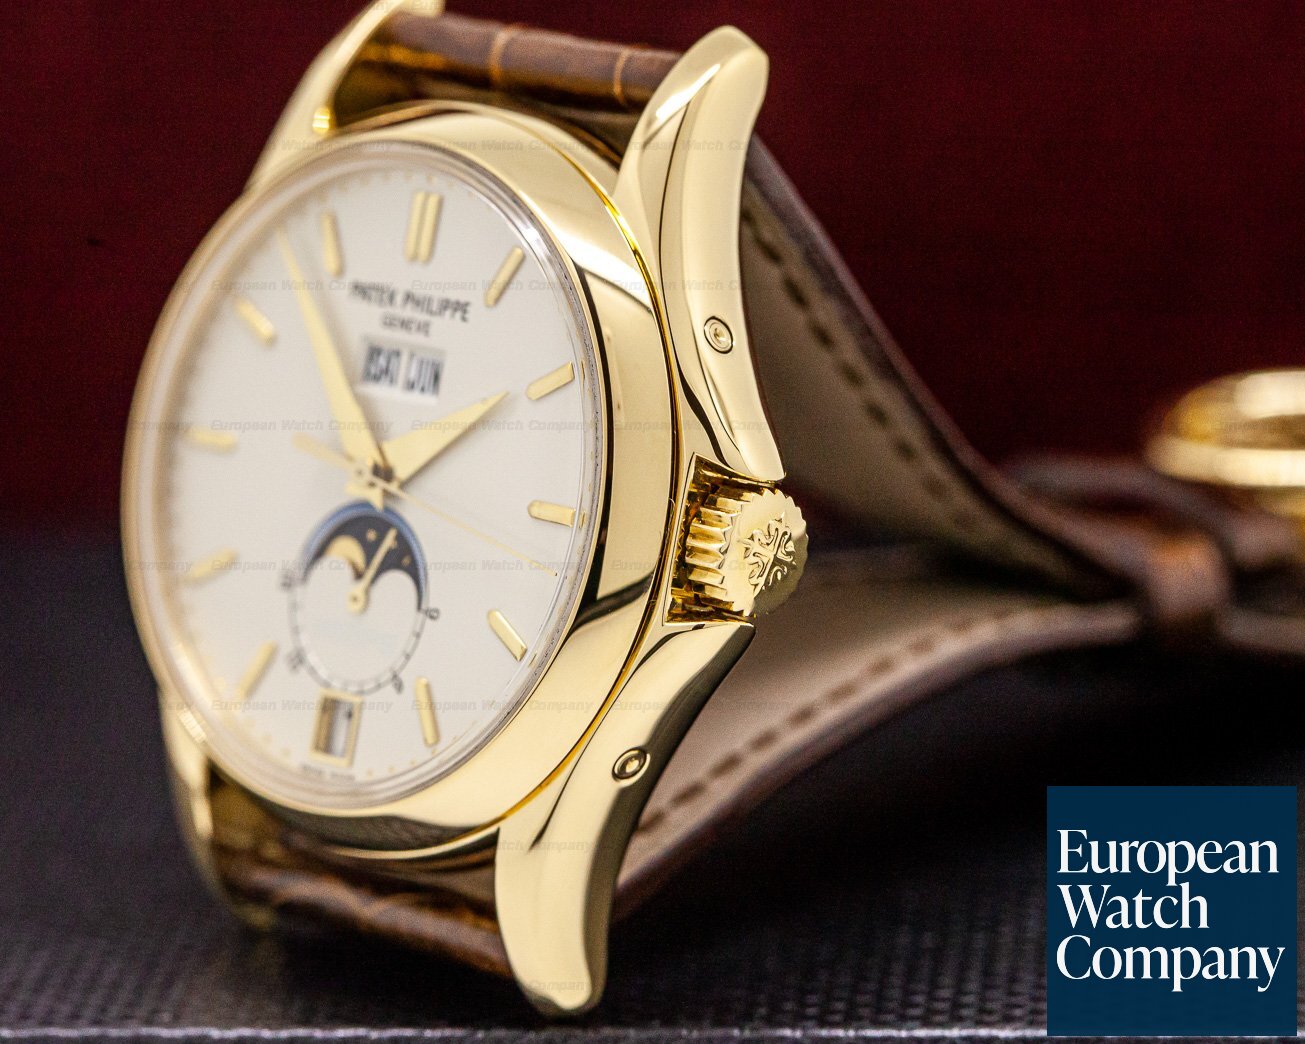 Patek Philippe Annual Calendar Wempe Limited Edition to 125 Pieces 18K Yellow Gold Ref. 5125J-010